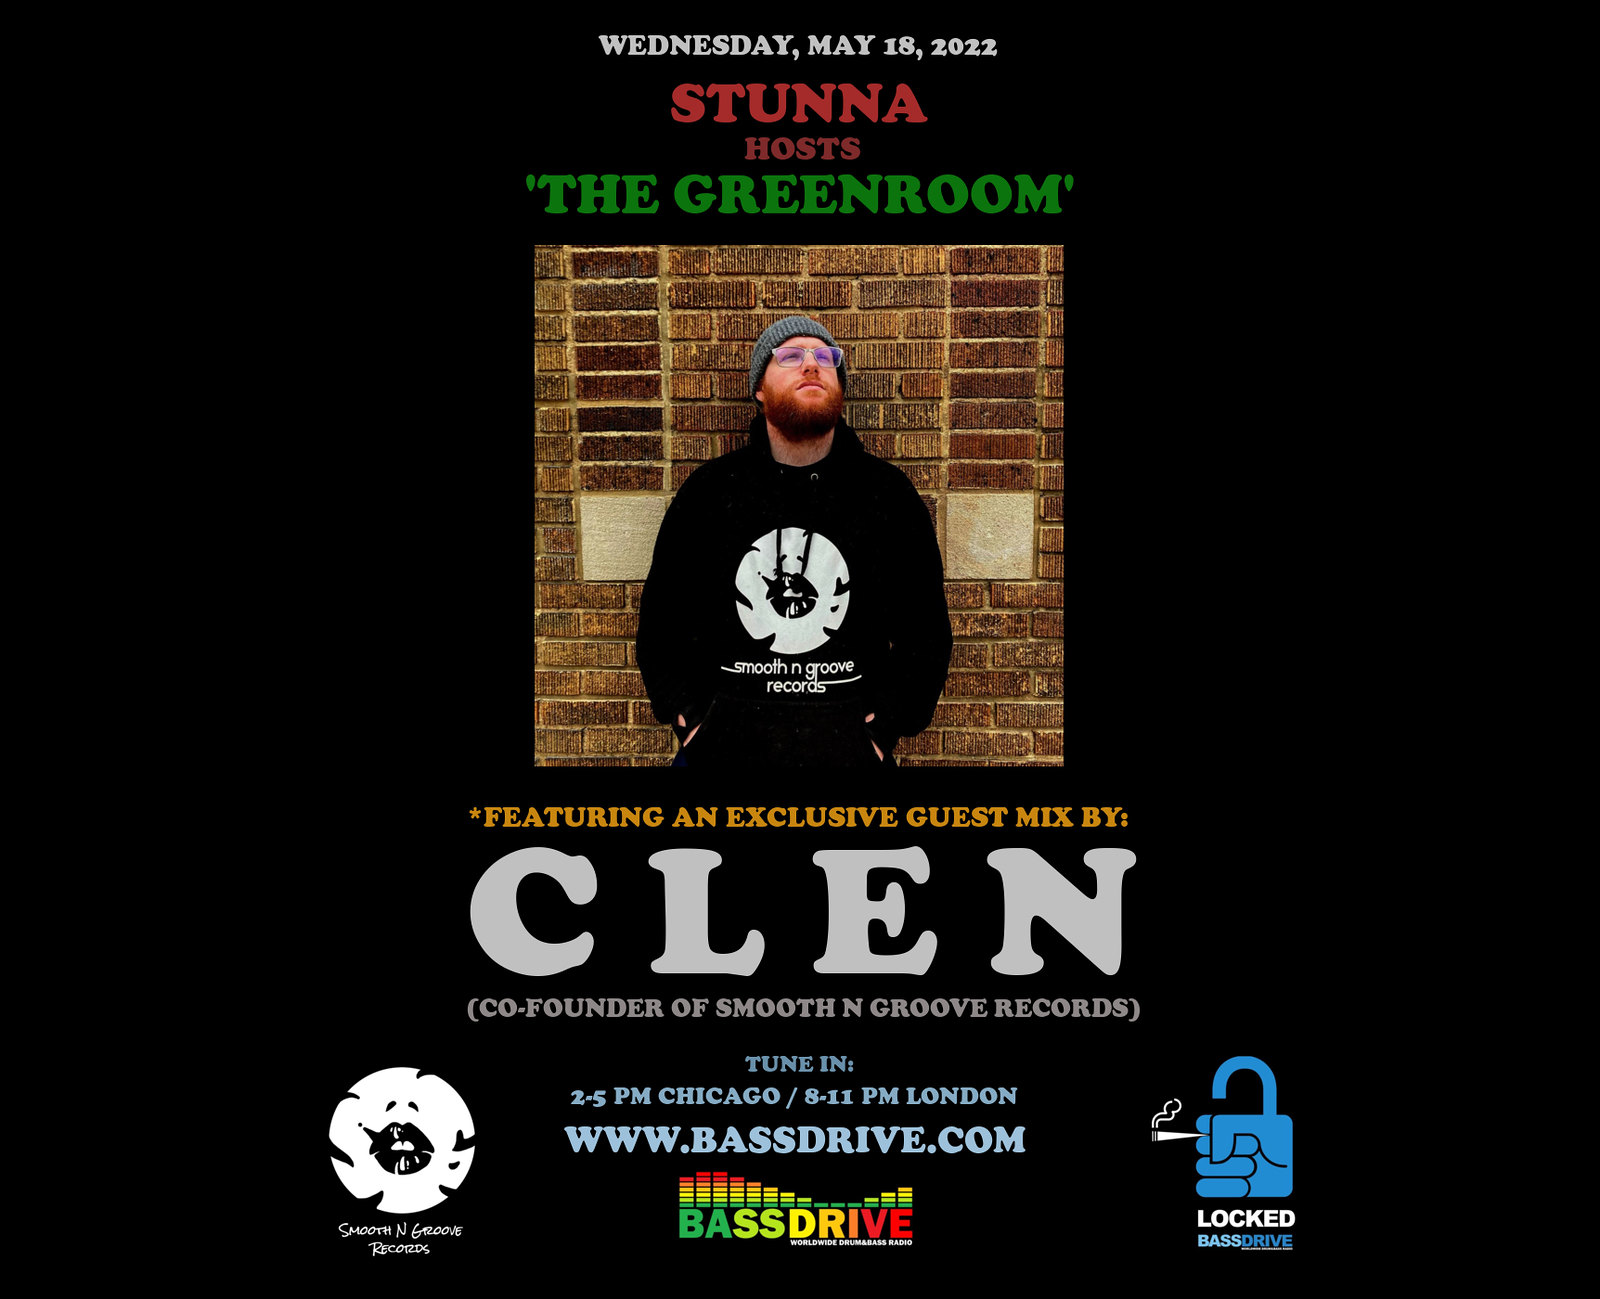 STUNNA's GREENROOM: 'THE GREENROOM' Guest Mix from CLEN (Smooth N